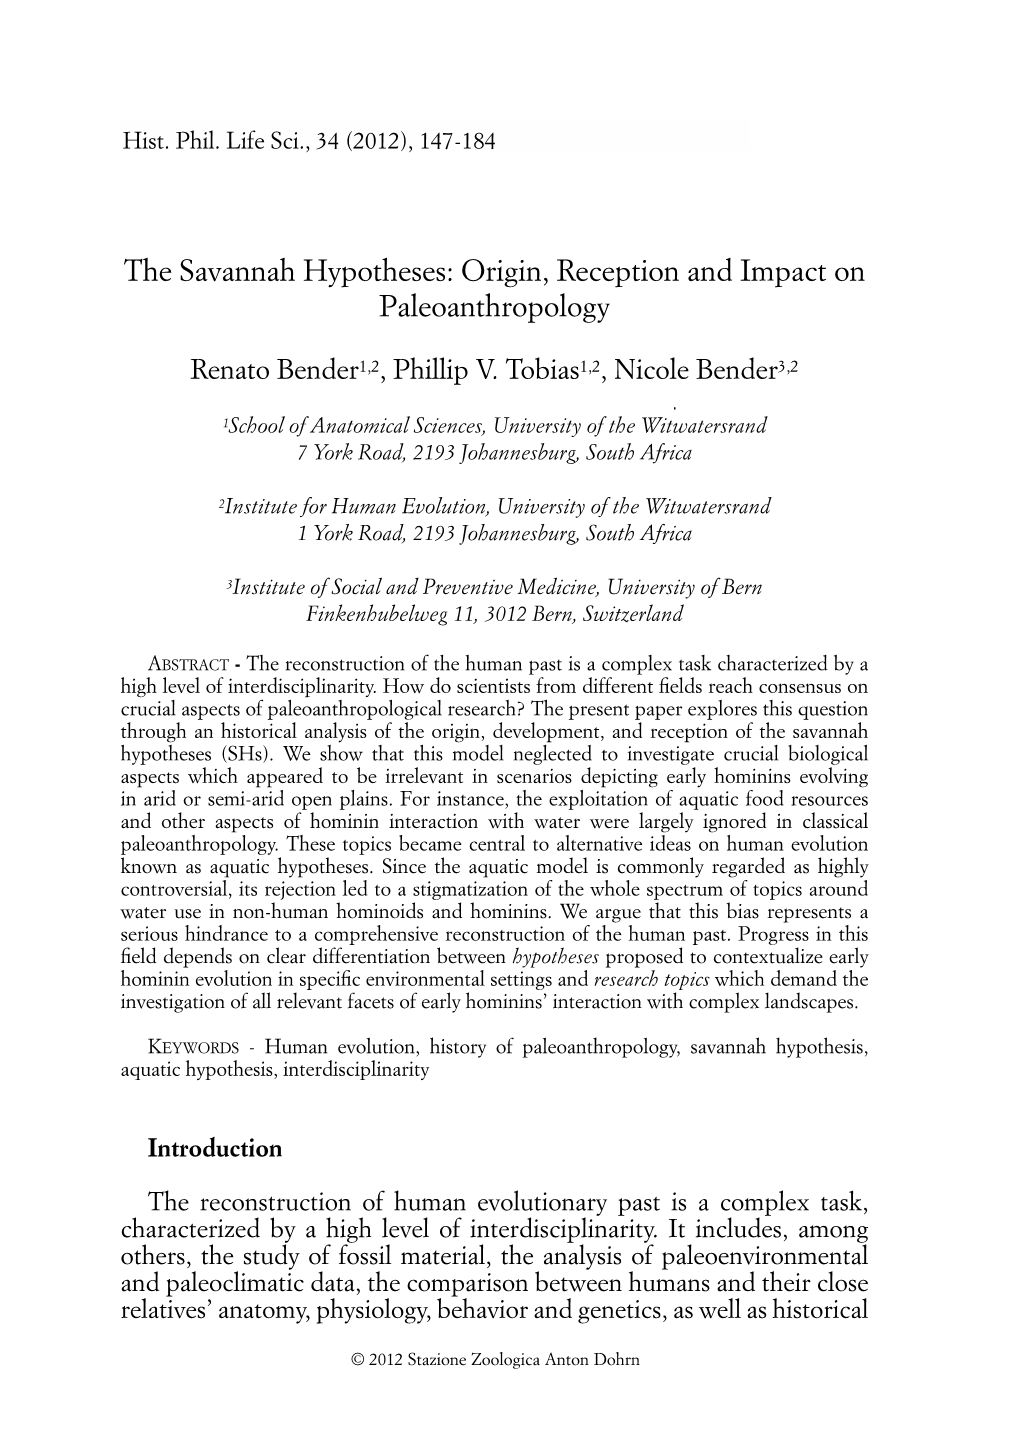 The Savannah Hypotheses: Origin, Reception and Impact on Paleoanthropology